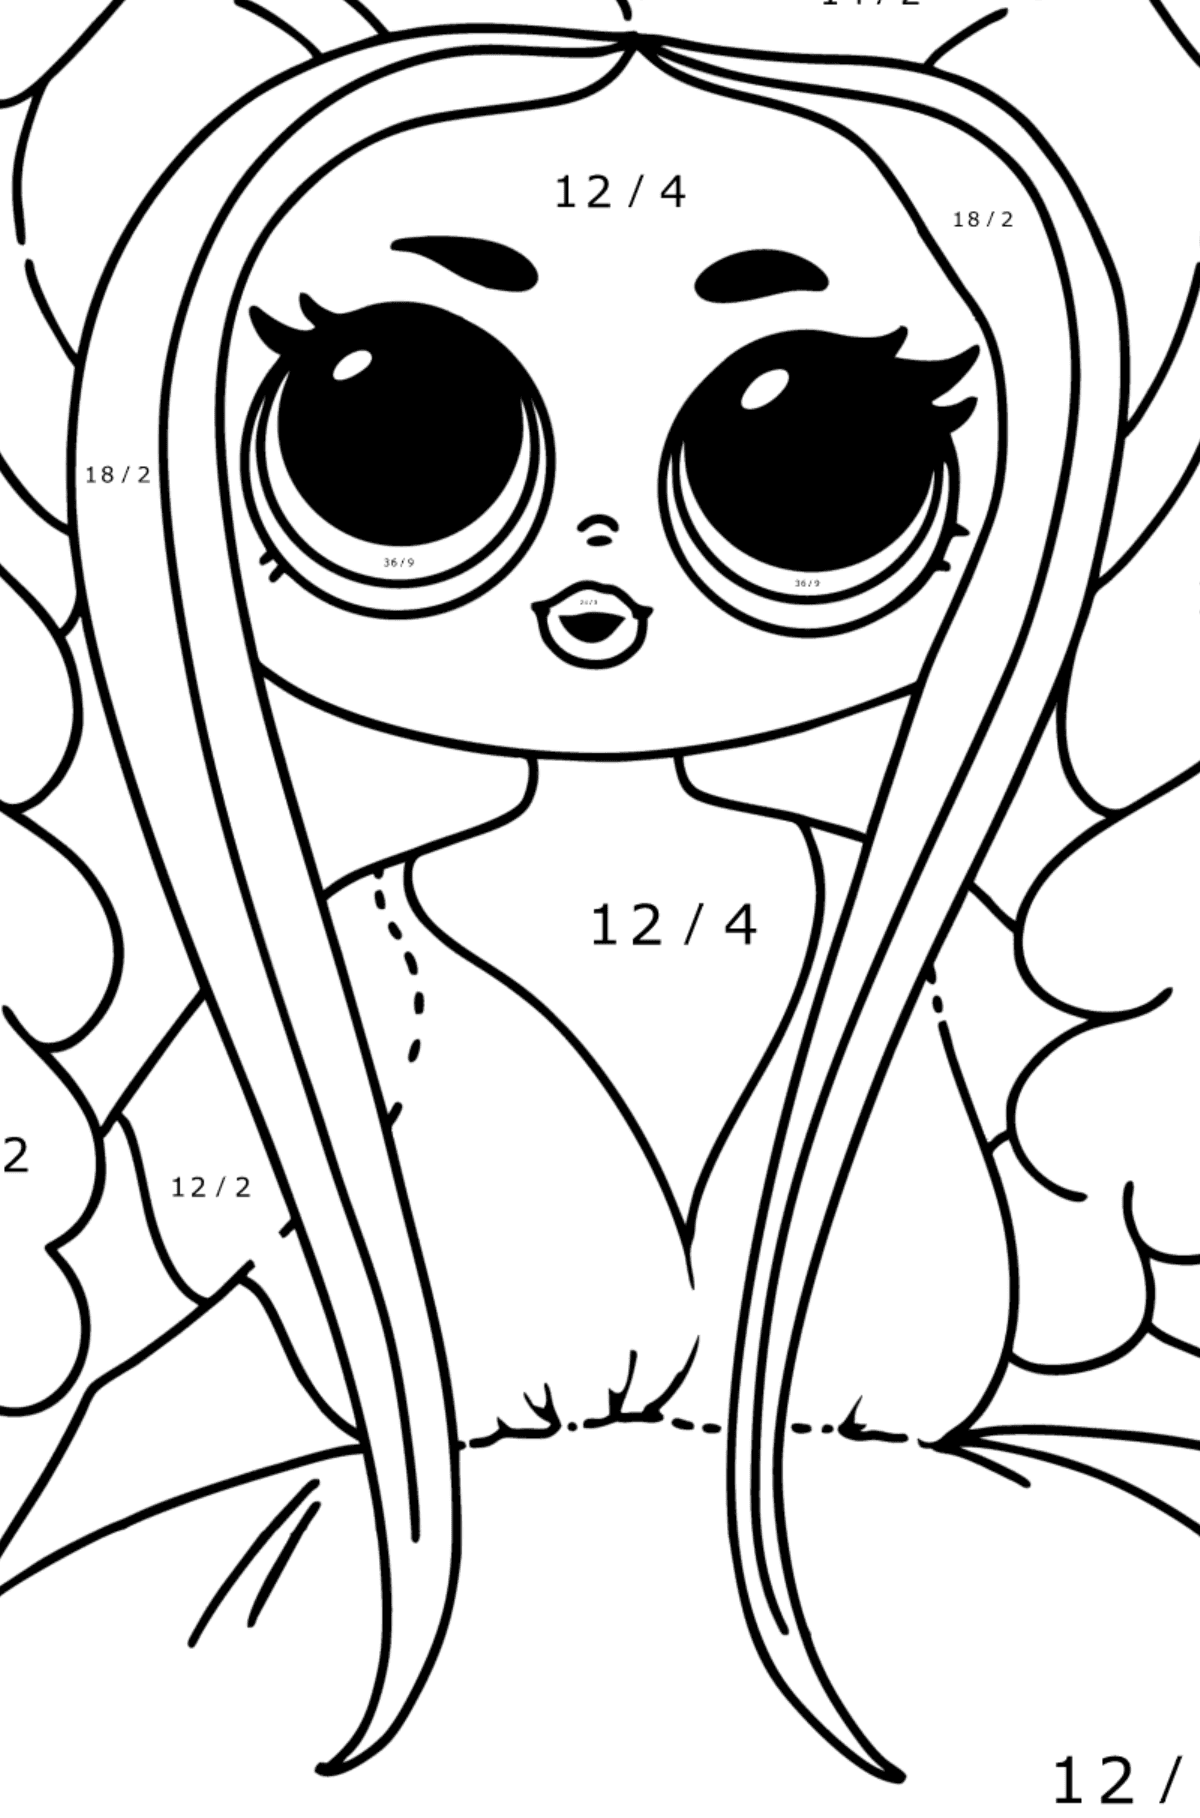 Coloring page LOL OMG Honeylicious Doll - Math Coloring - Division for Kids